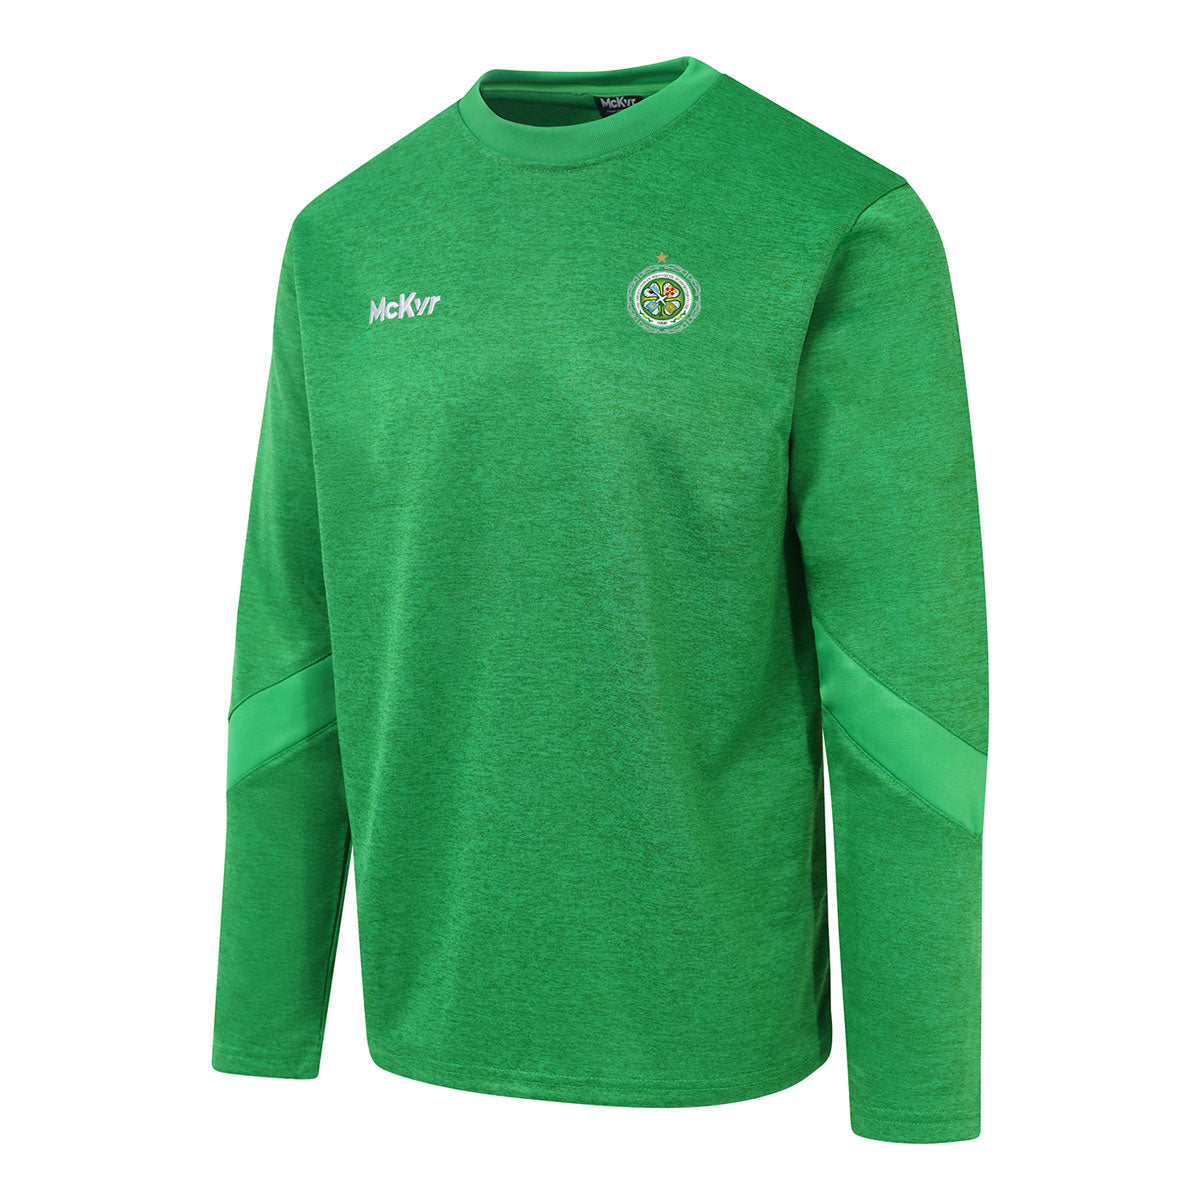 Mc Keever The Association of Irish Celtic Supporters Clubs Core 22 Sweat Top - Adult - Green